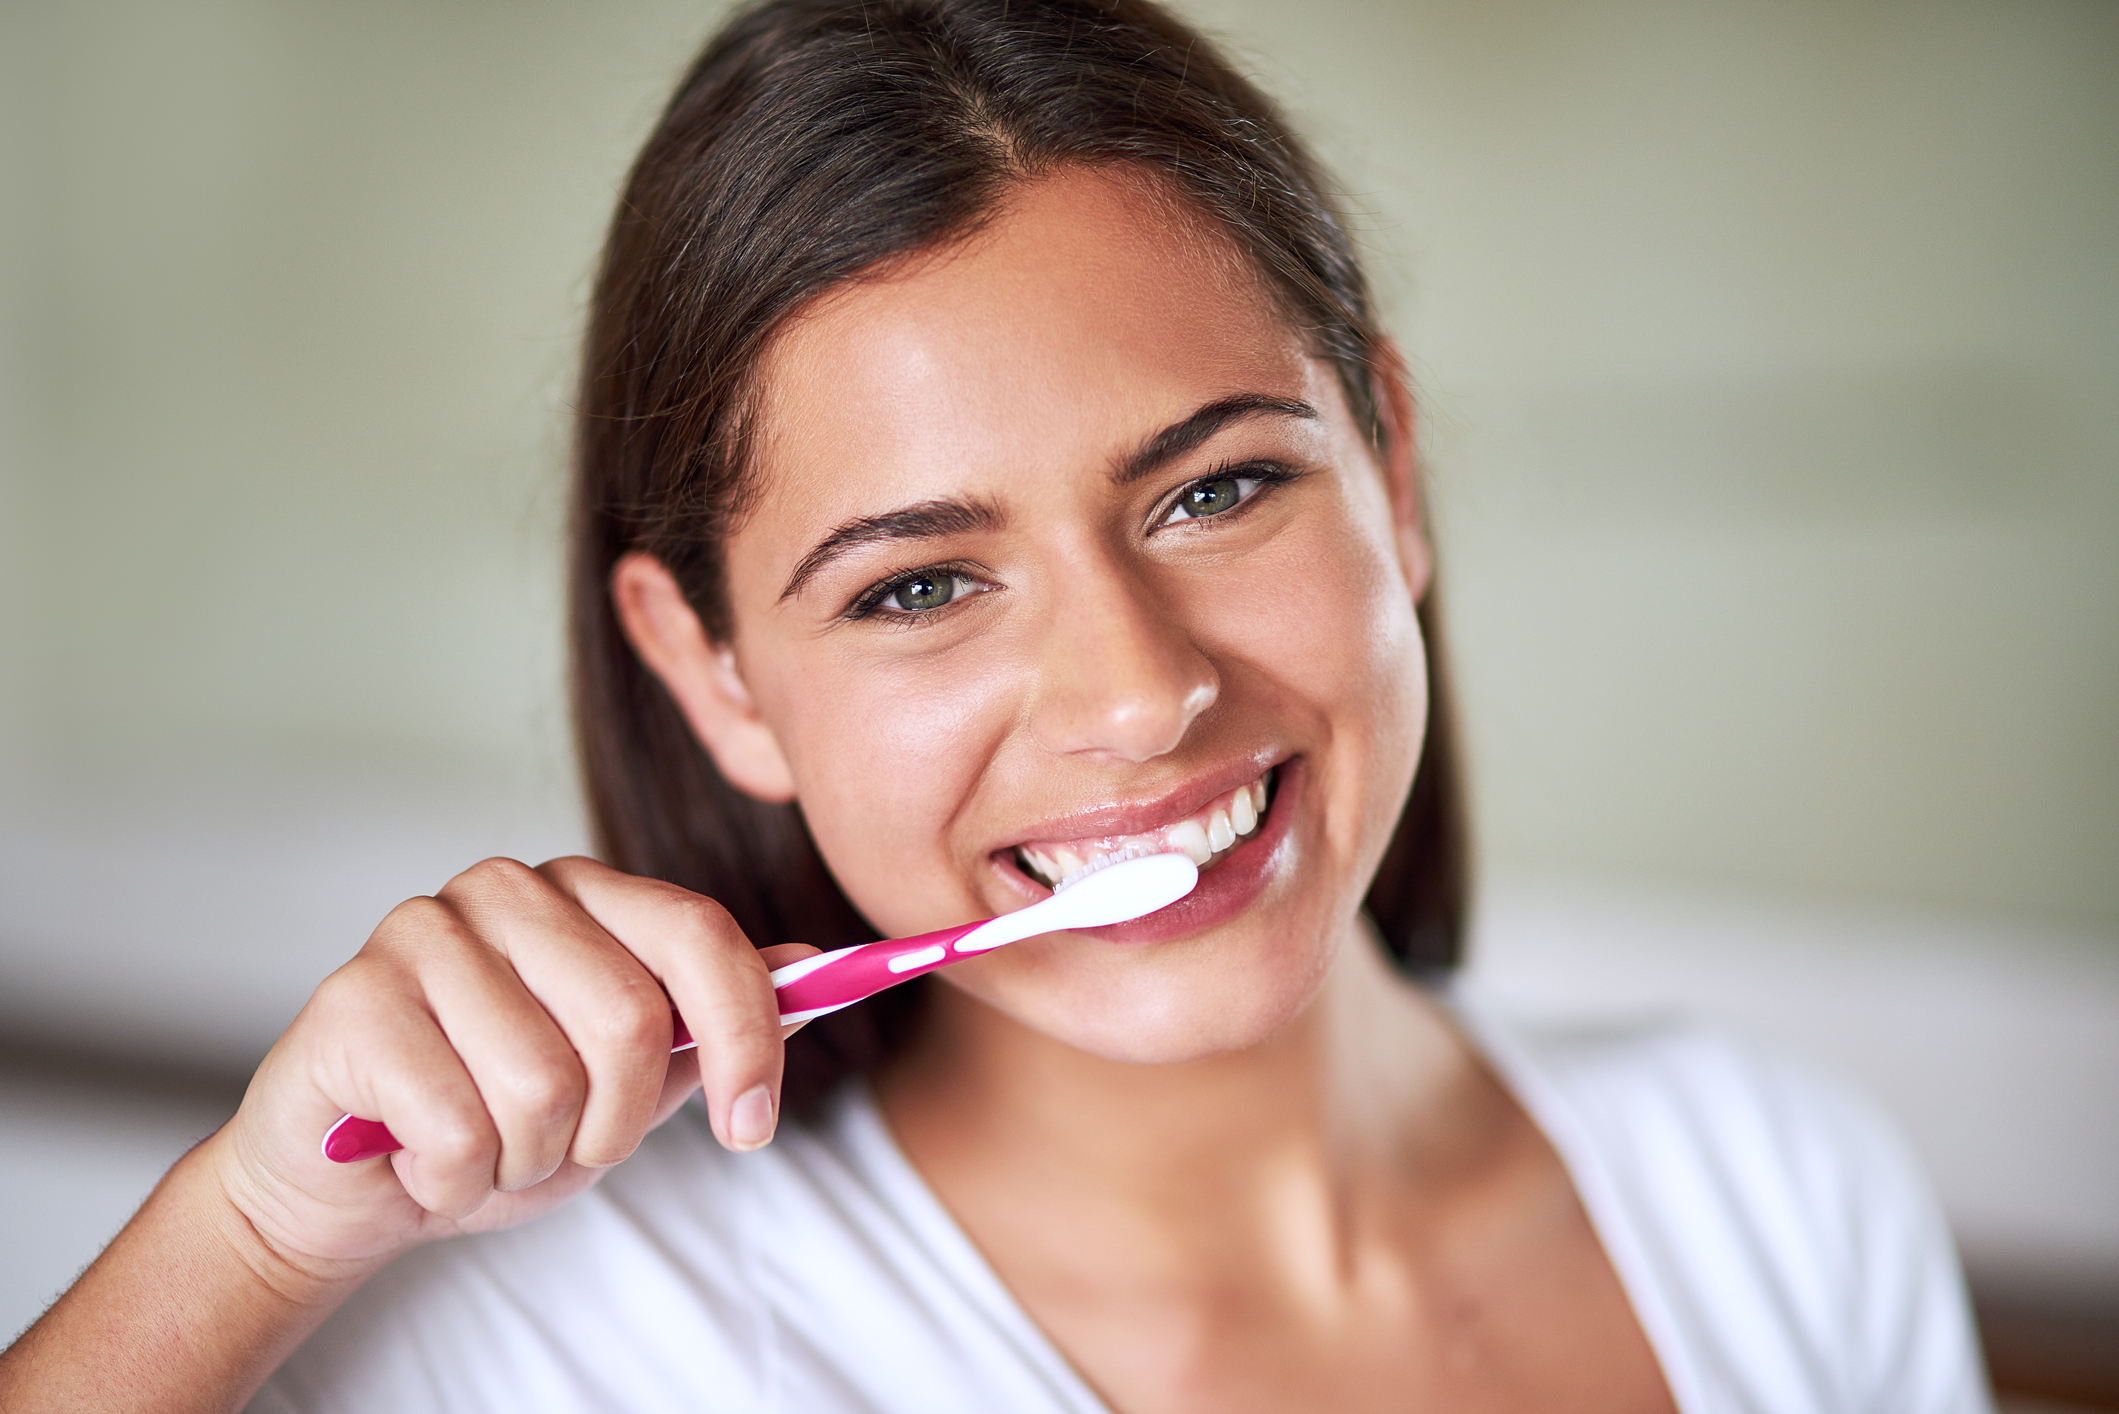 How to Care for Your Teeth Between Dental Visits